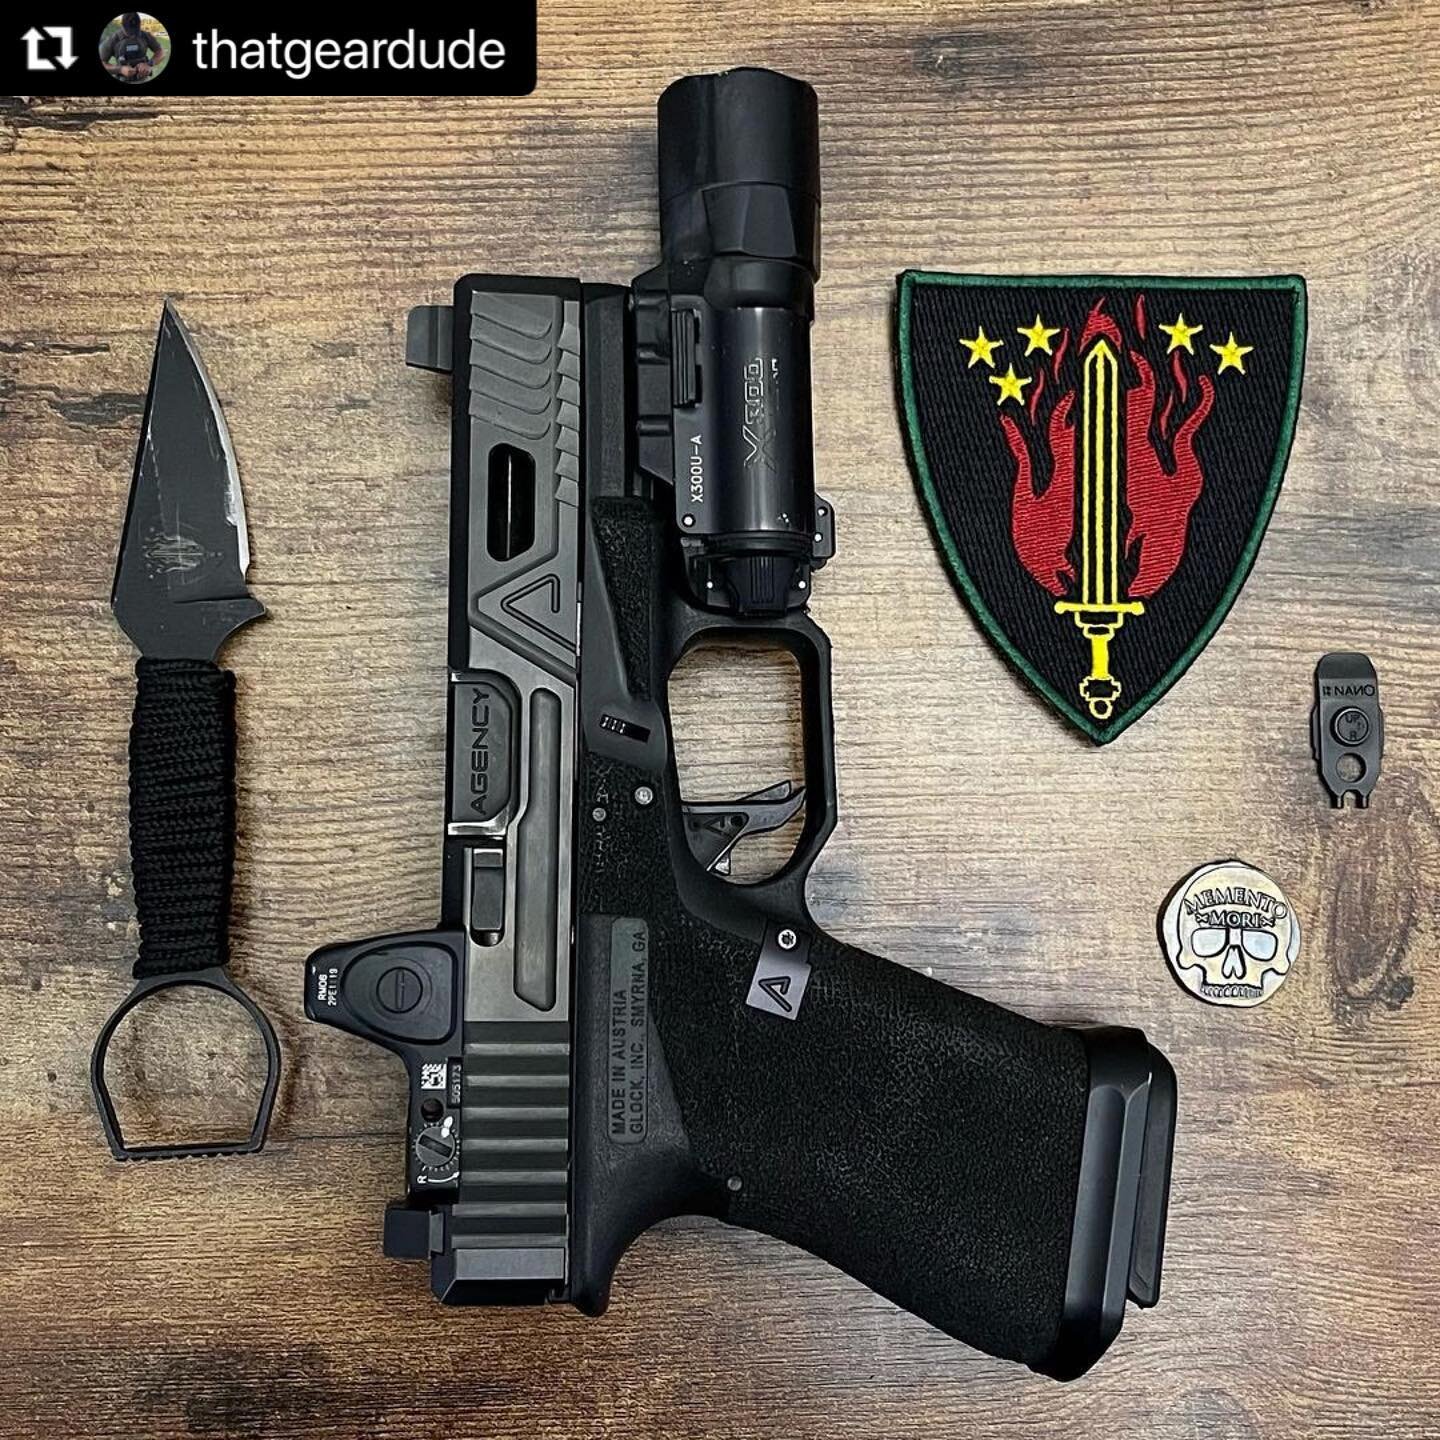 Only the essentials for this EDC. 
What would you include for this setup? 

#Repost @thatgeardude with @make_repost
・・・
🇺🇸
&bull;
&bull;
&bull;
GEAR
@glockinc 19 build by @agencyarms 10% off &ldquo;thatgeardude&rdquo;
@surefire_llc X300UA
@trijicon